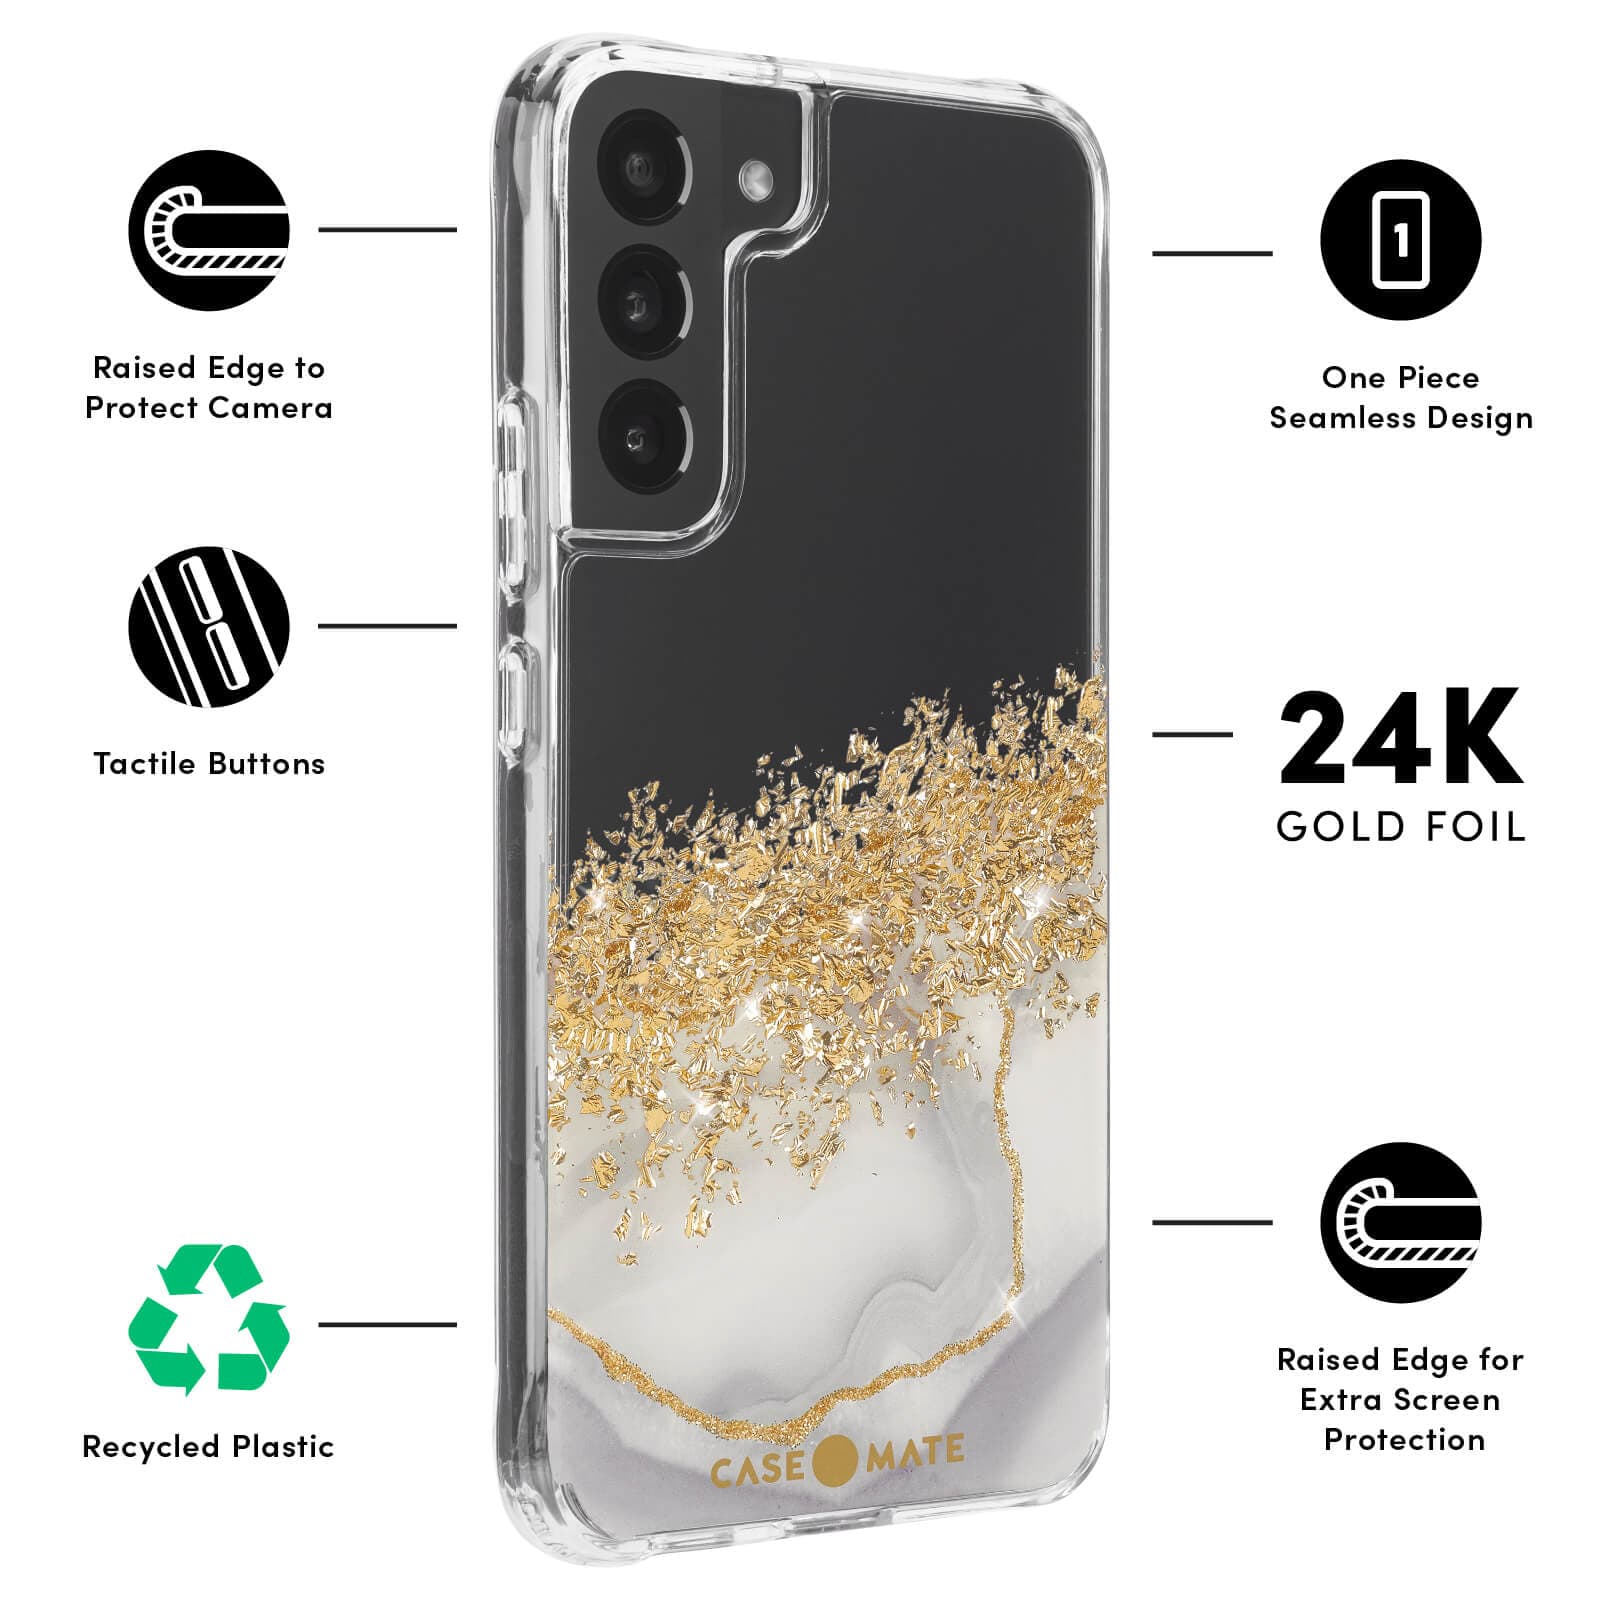 RAISED EDGE TO PROTECT CAMERA, TACTILE BUTTONS, RECYCLED PLASTIC, ONE PIECE SEAMLESS DESIGN, 24K GOLD FOIL, RAISED EDGE FOR EXTRA SCREEN PROTECTION. COLOR::KARAT MARBLE